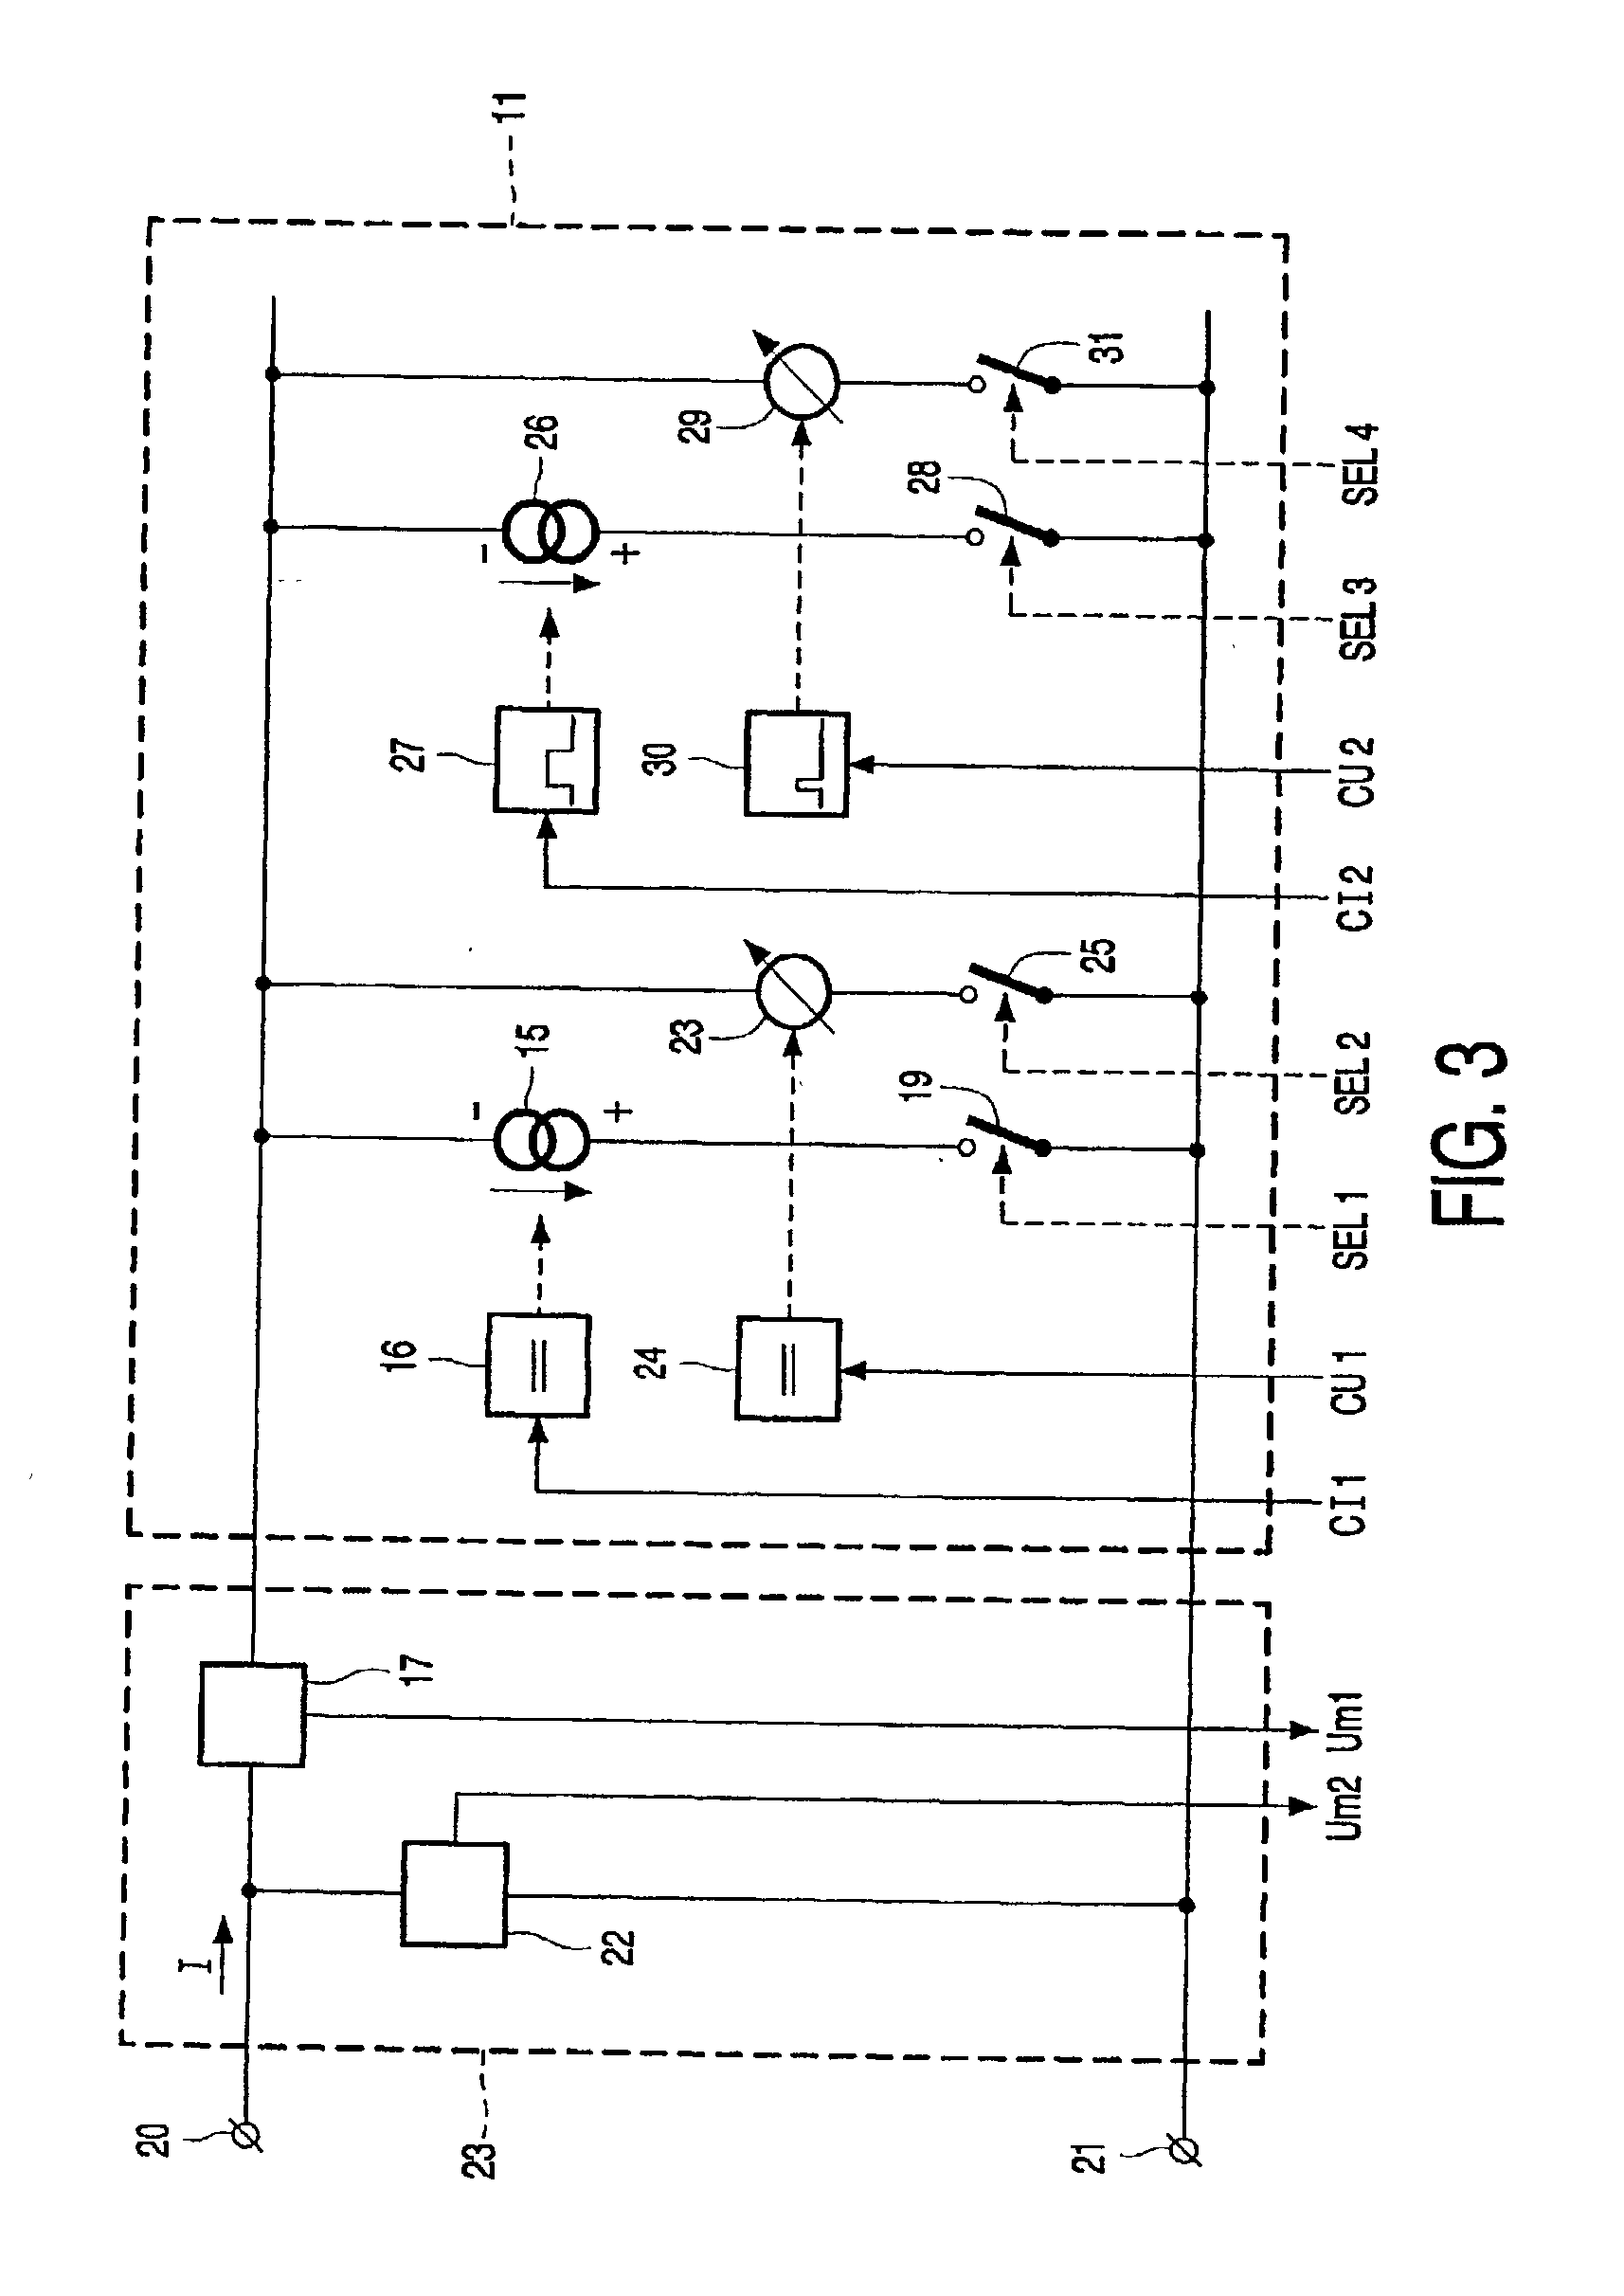 Method of controlling an electrochemical machining process